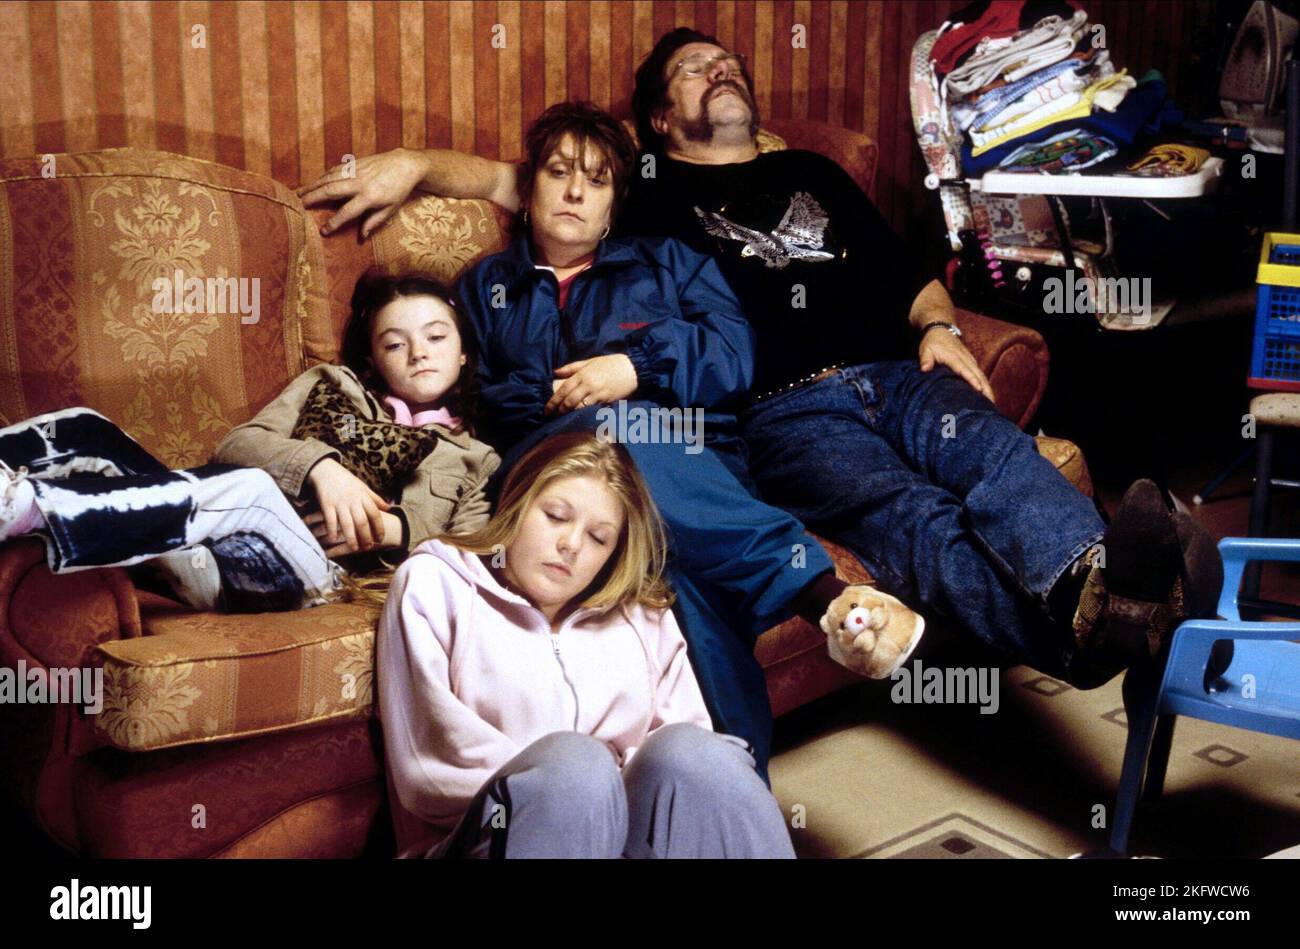 FINN ATKINS, KELLY TRESHER, KATHY BURKE, RICKY TOMLINSON, ONCE UPON A TIME IN THE MIDLANDS, 2002 Stock Photo